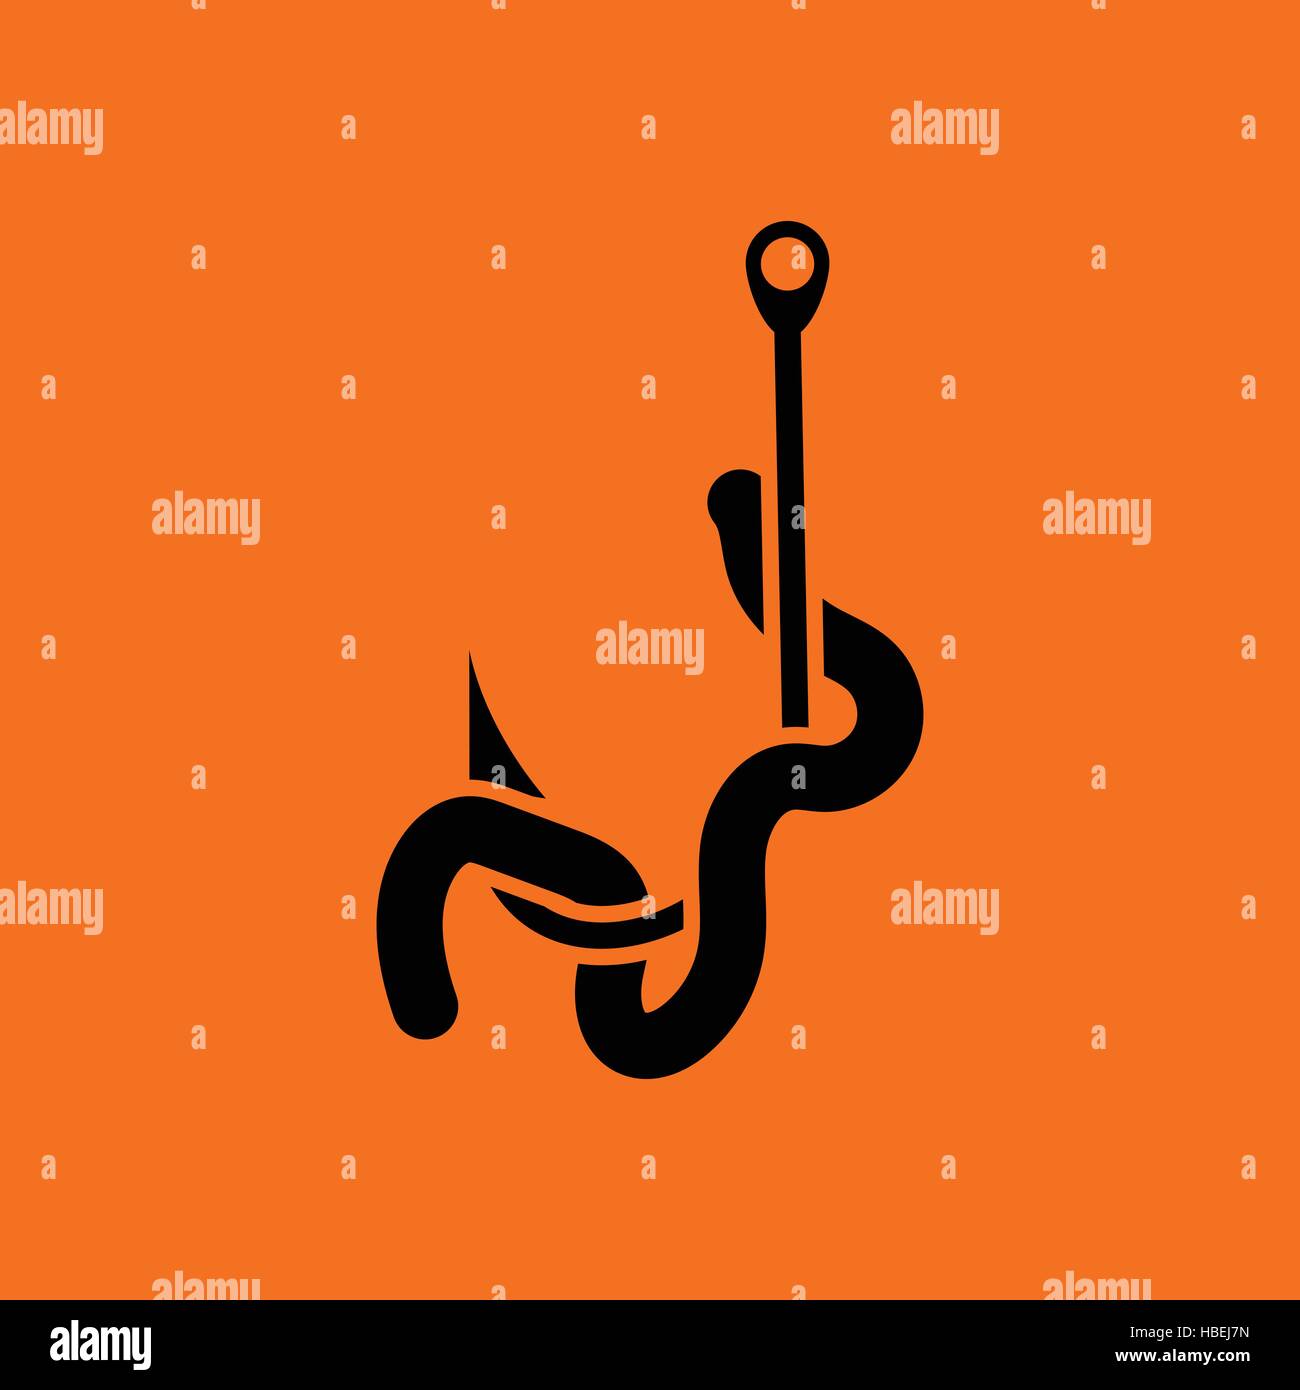 Icon of worm on hook. Orange background with black. Vector illustration. Stock Vector